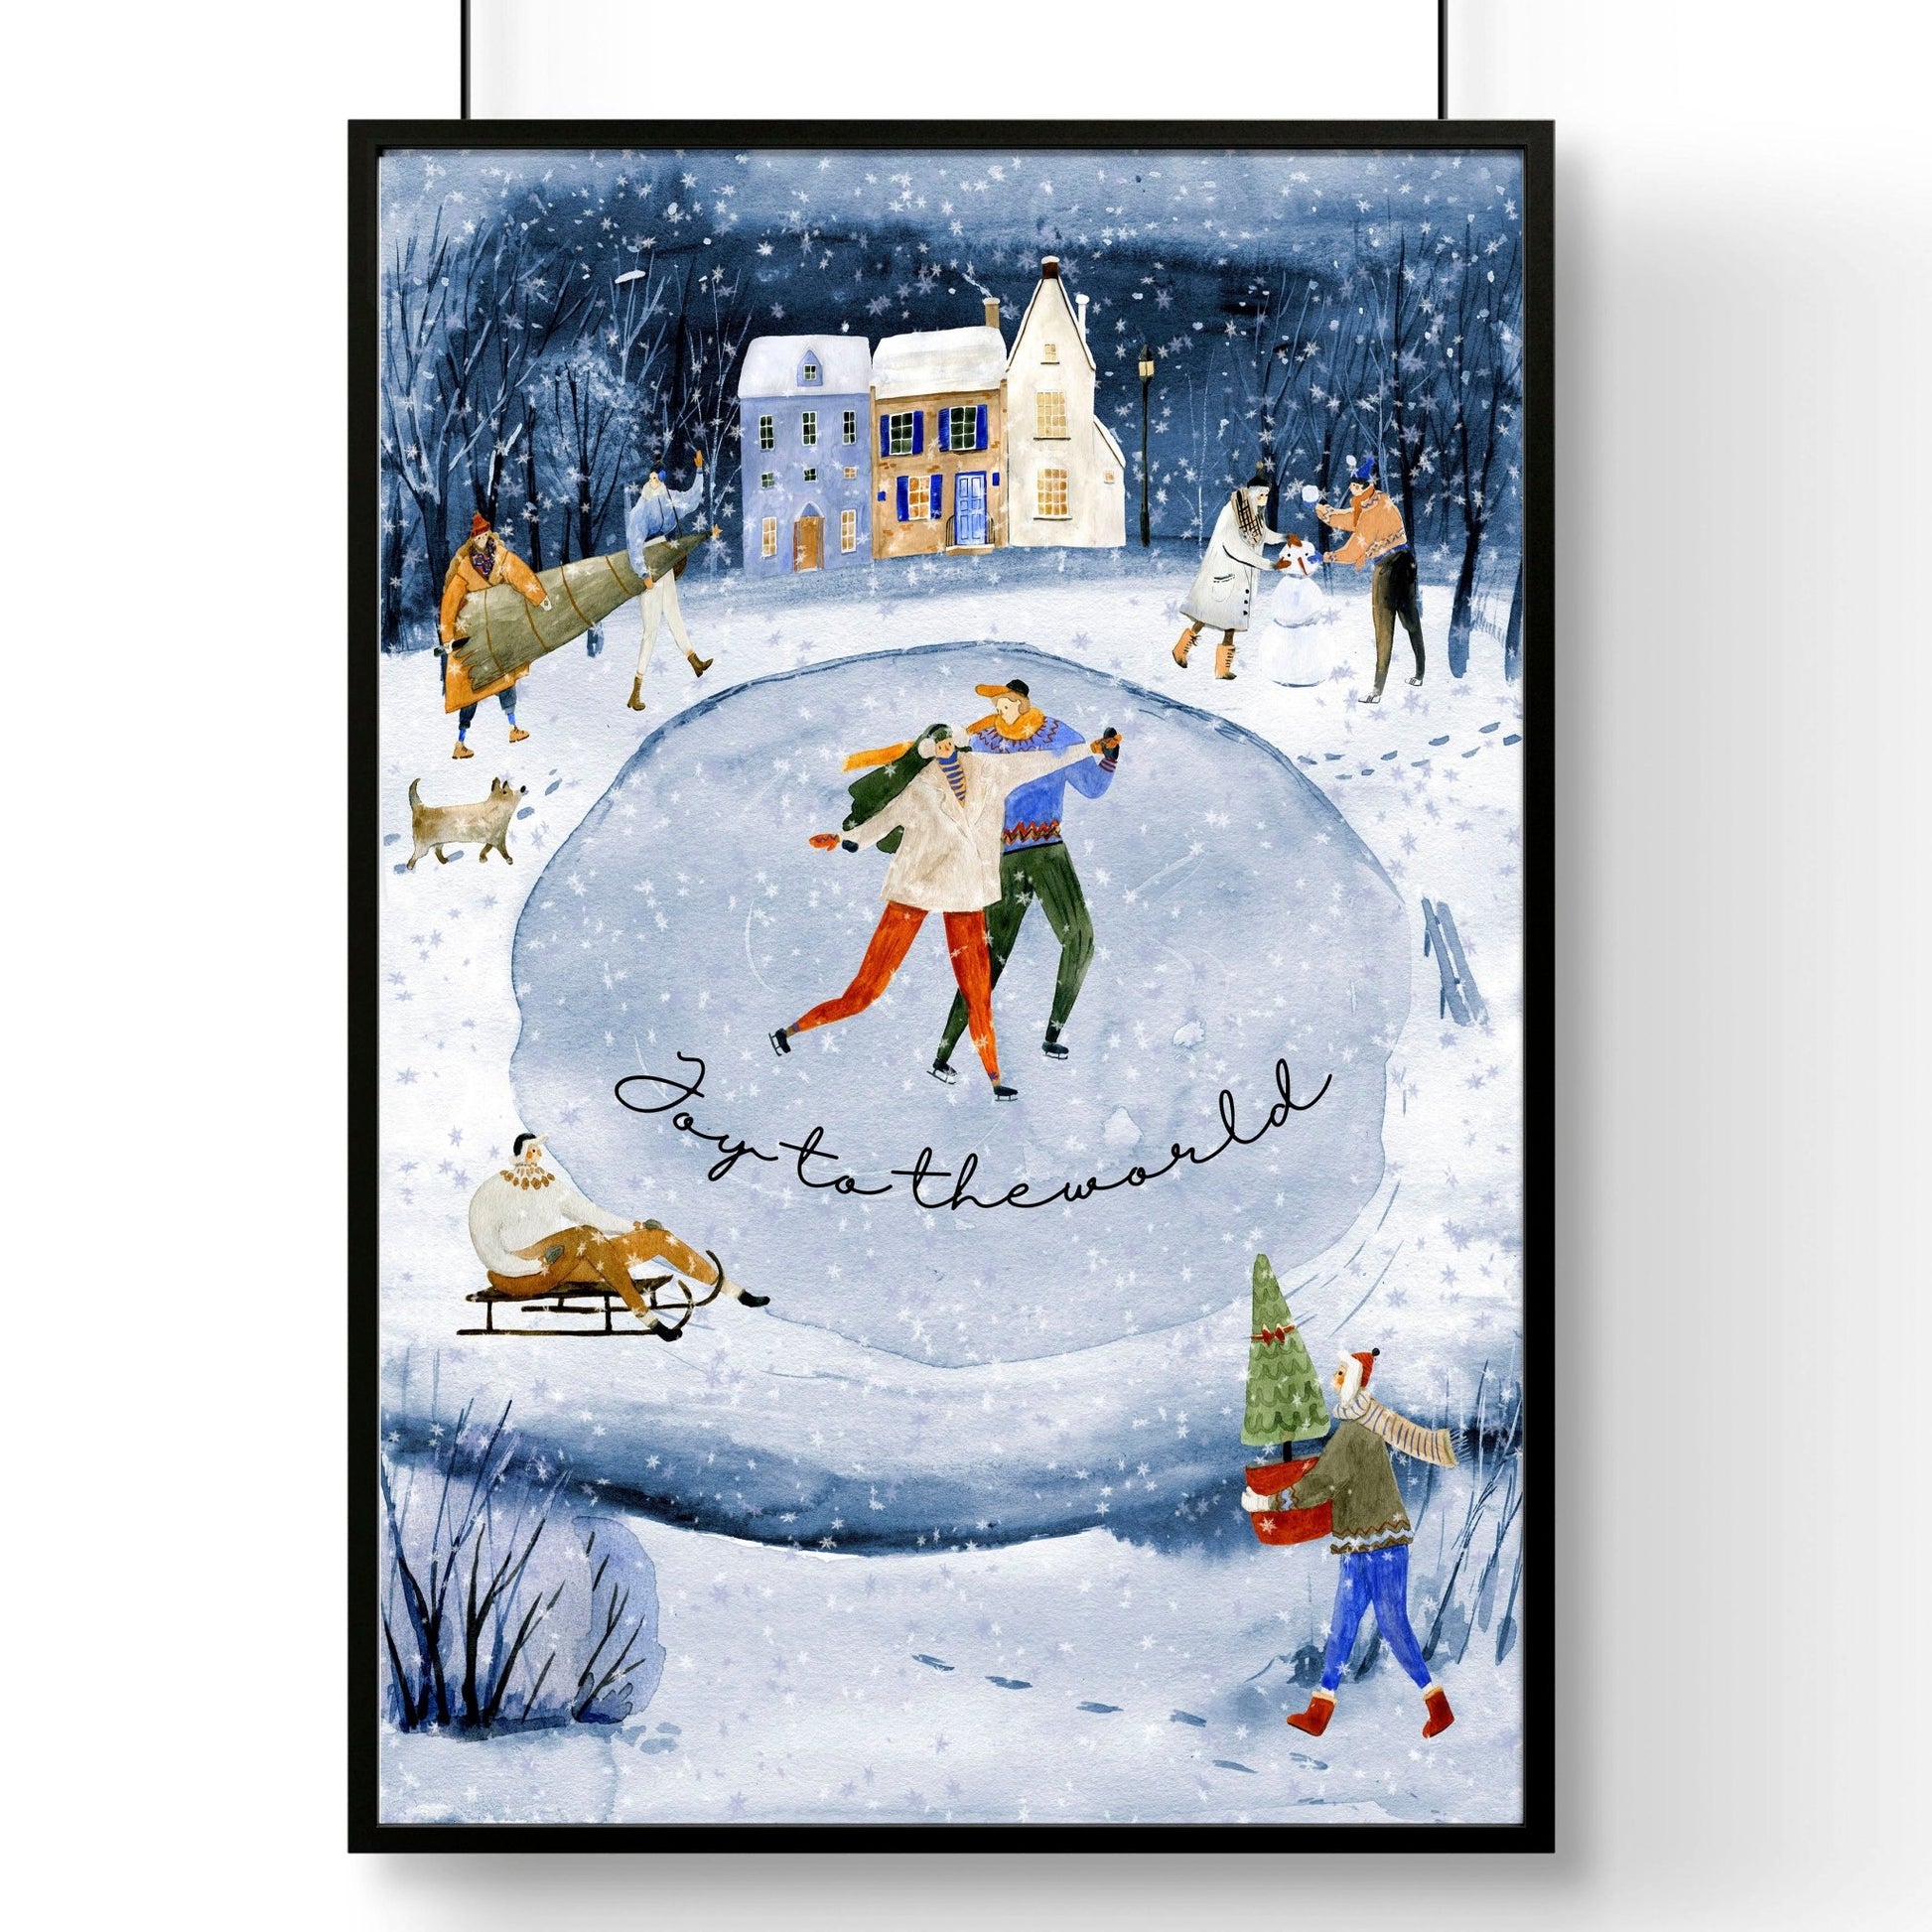 Christmas wall decorations indoor | wall art print - About Wall Art